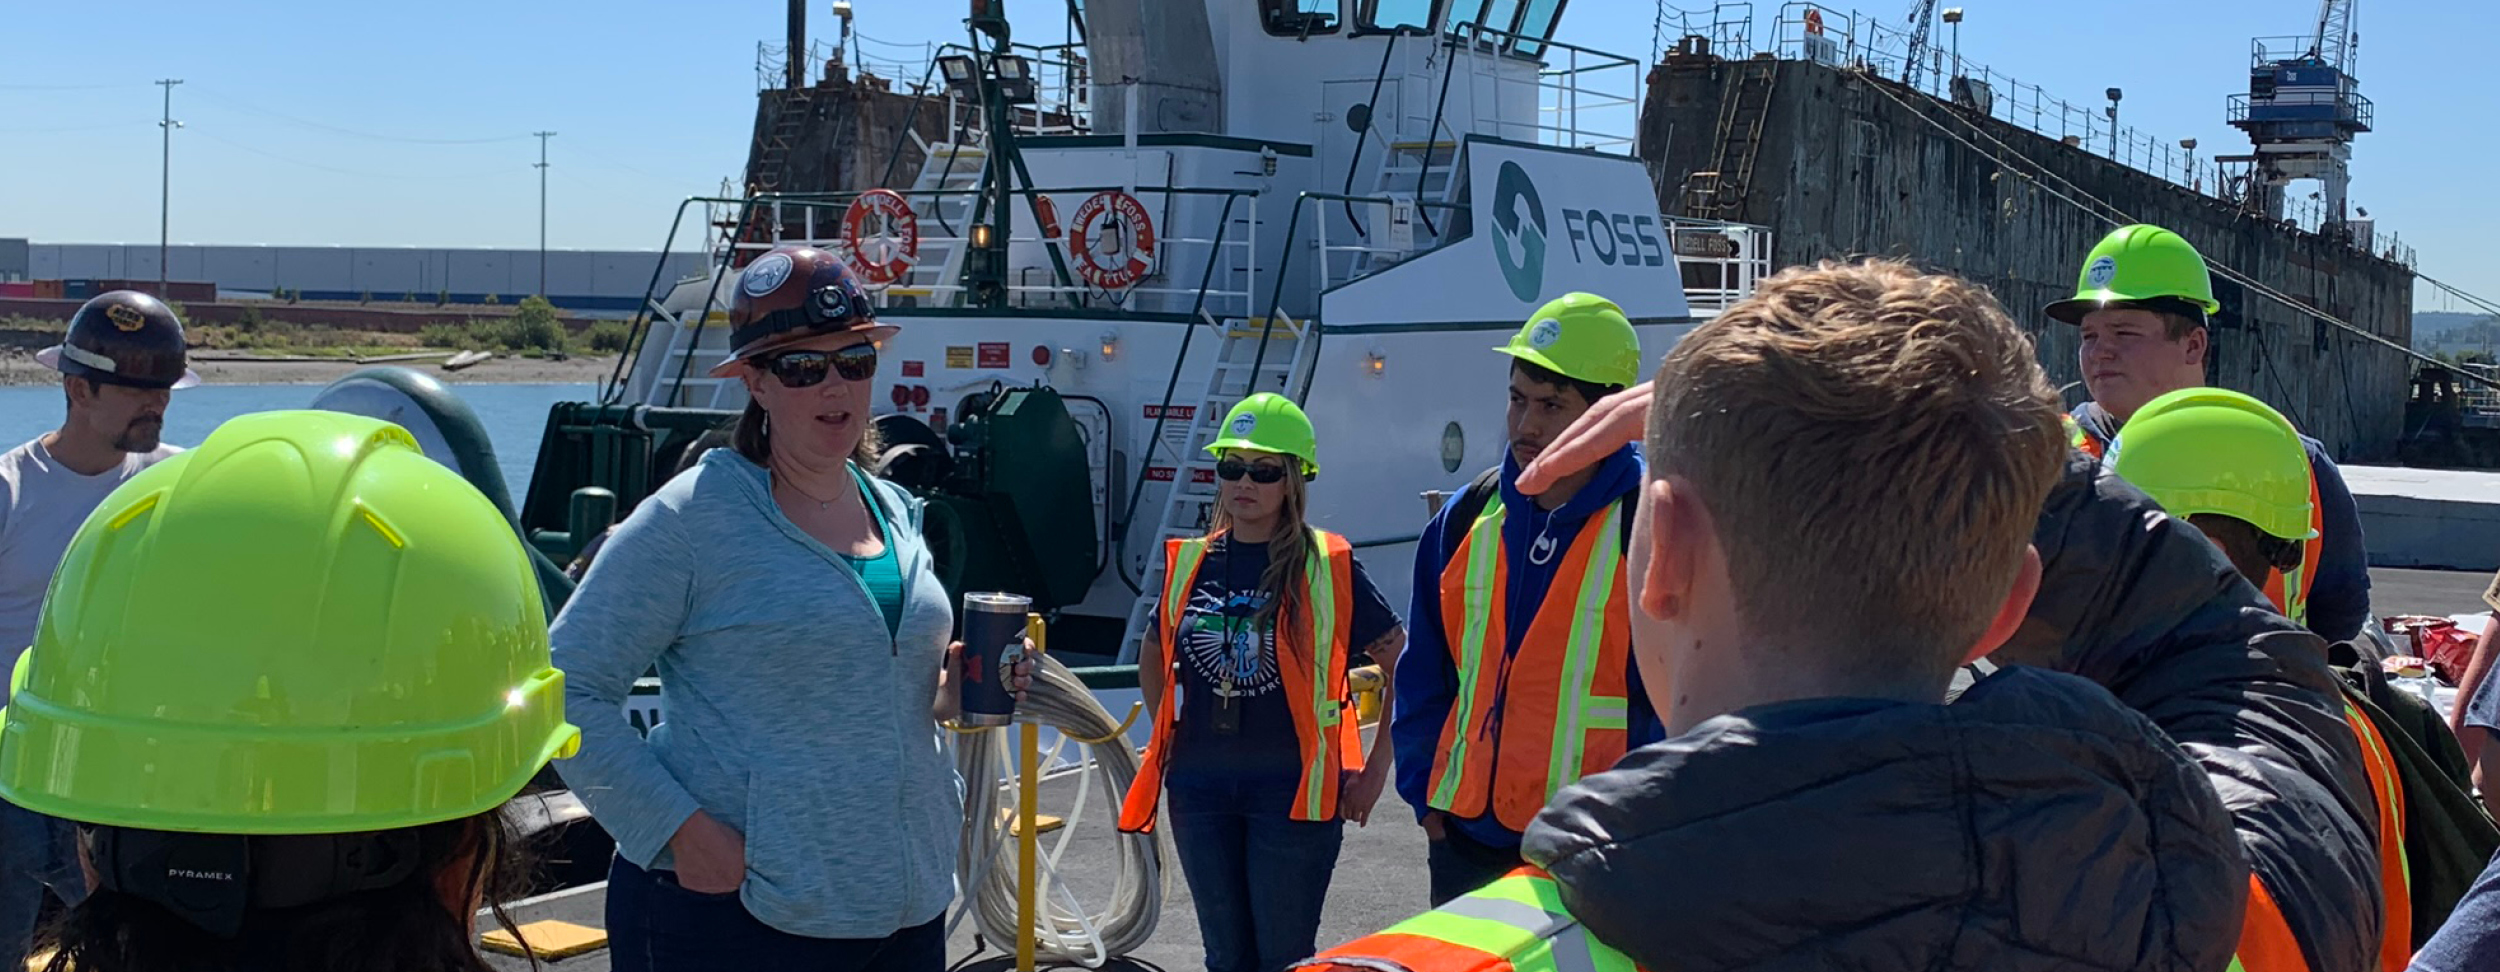 Tacoma Public Schools students get hands-on experience learning about the maritime industry.